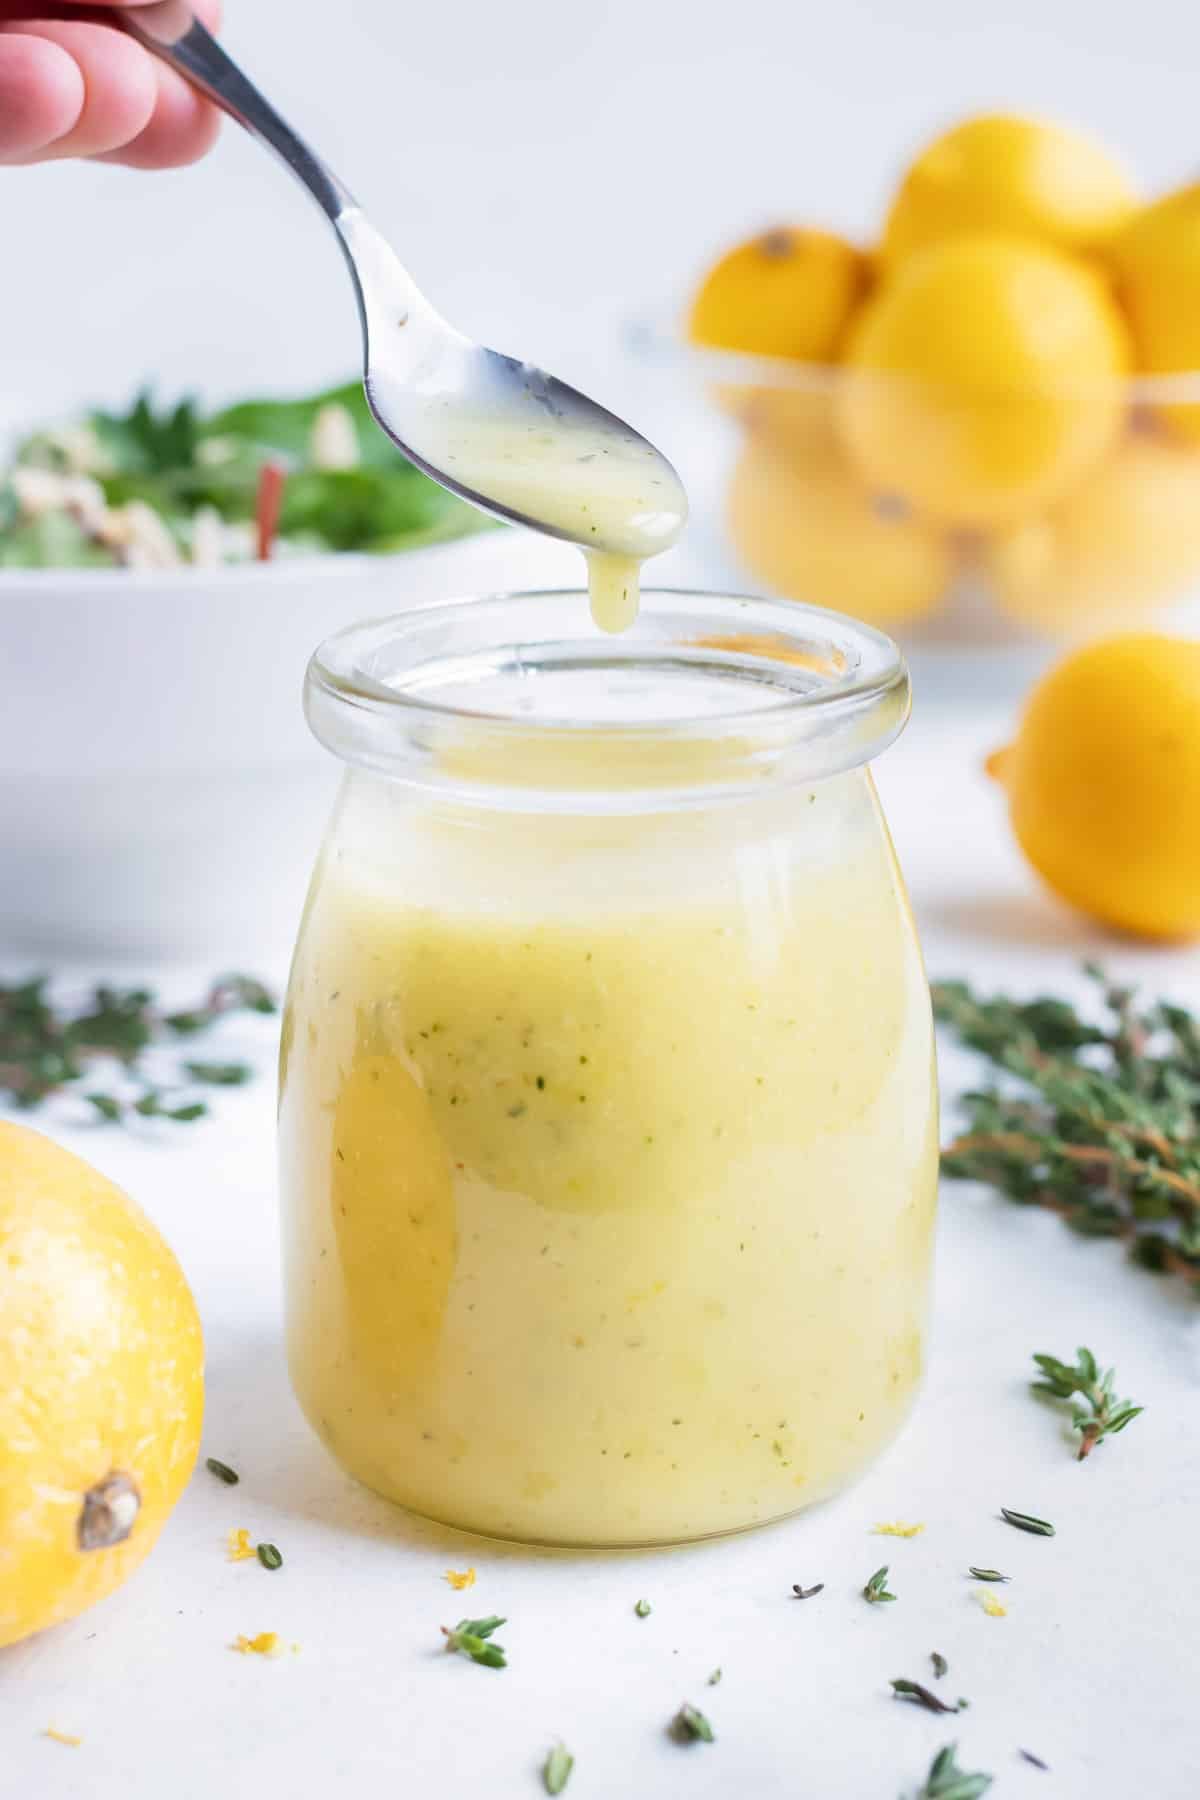 Lemon dressing is served with a spoon from a jar.